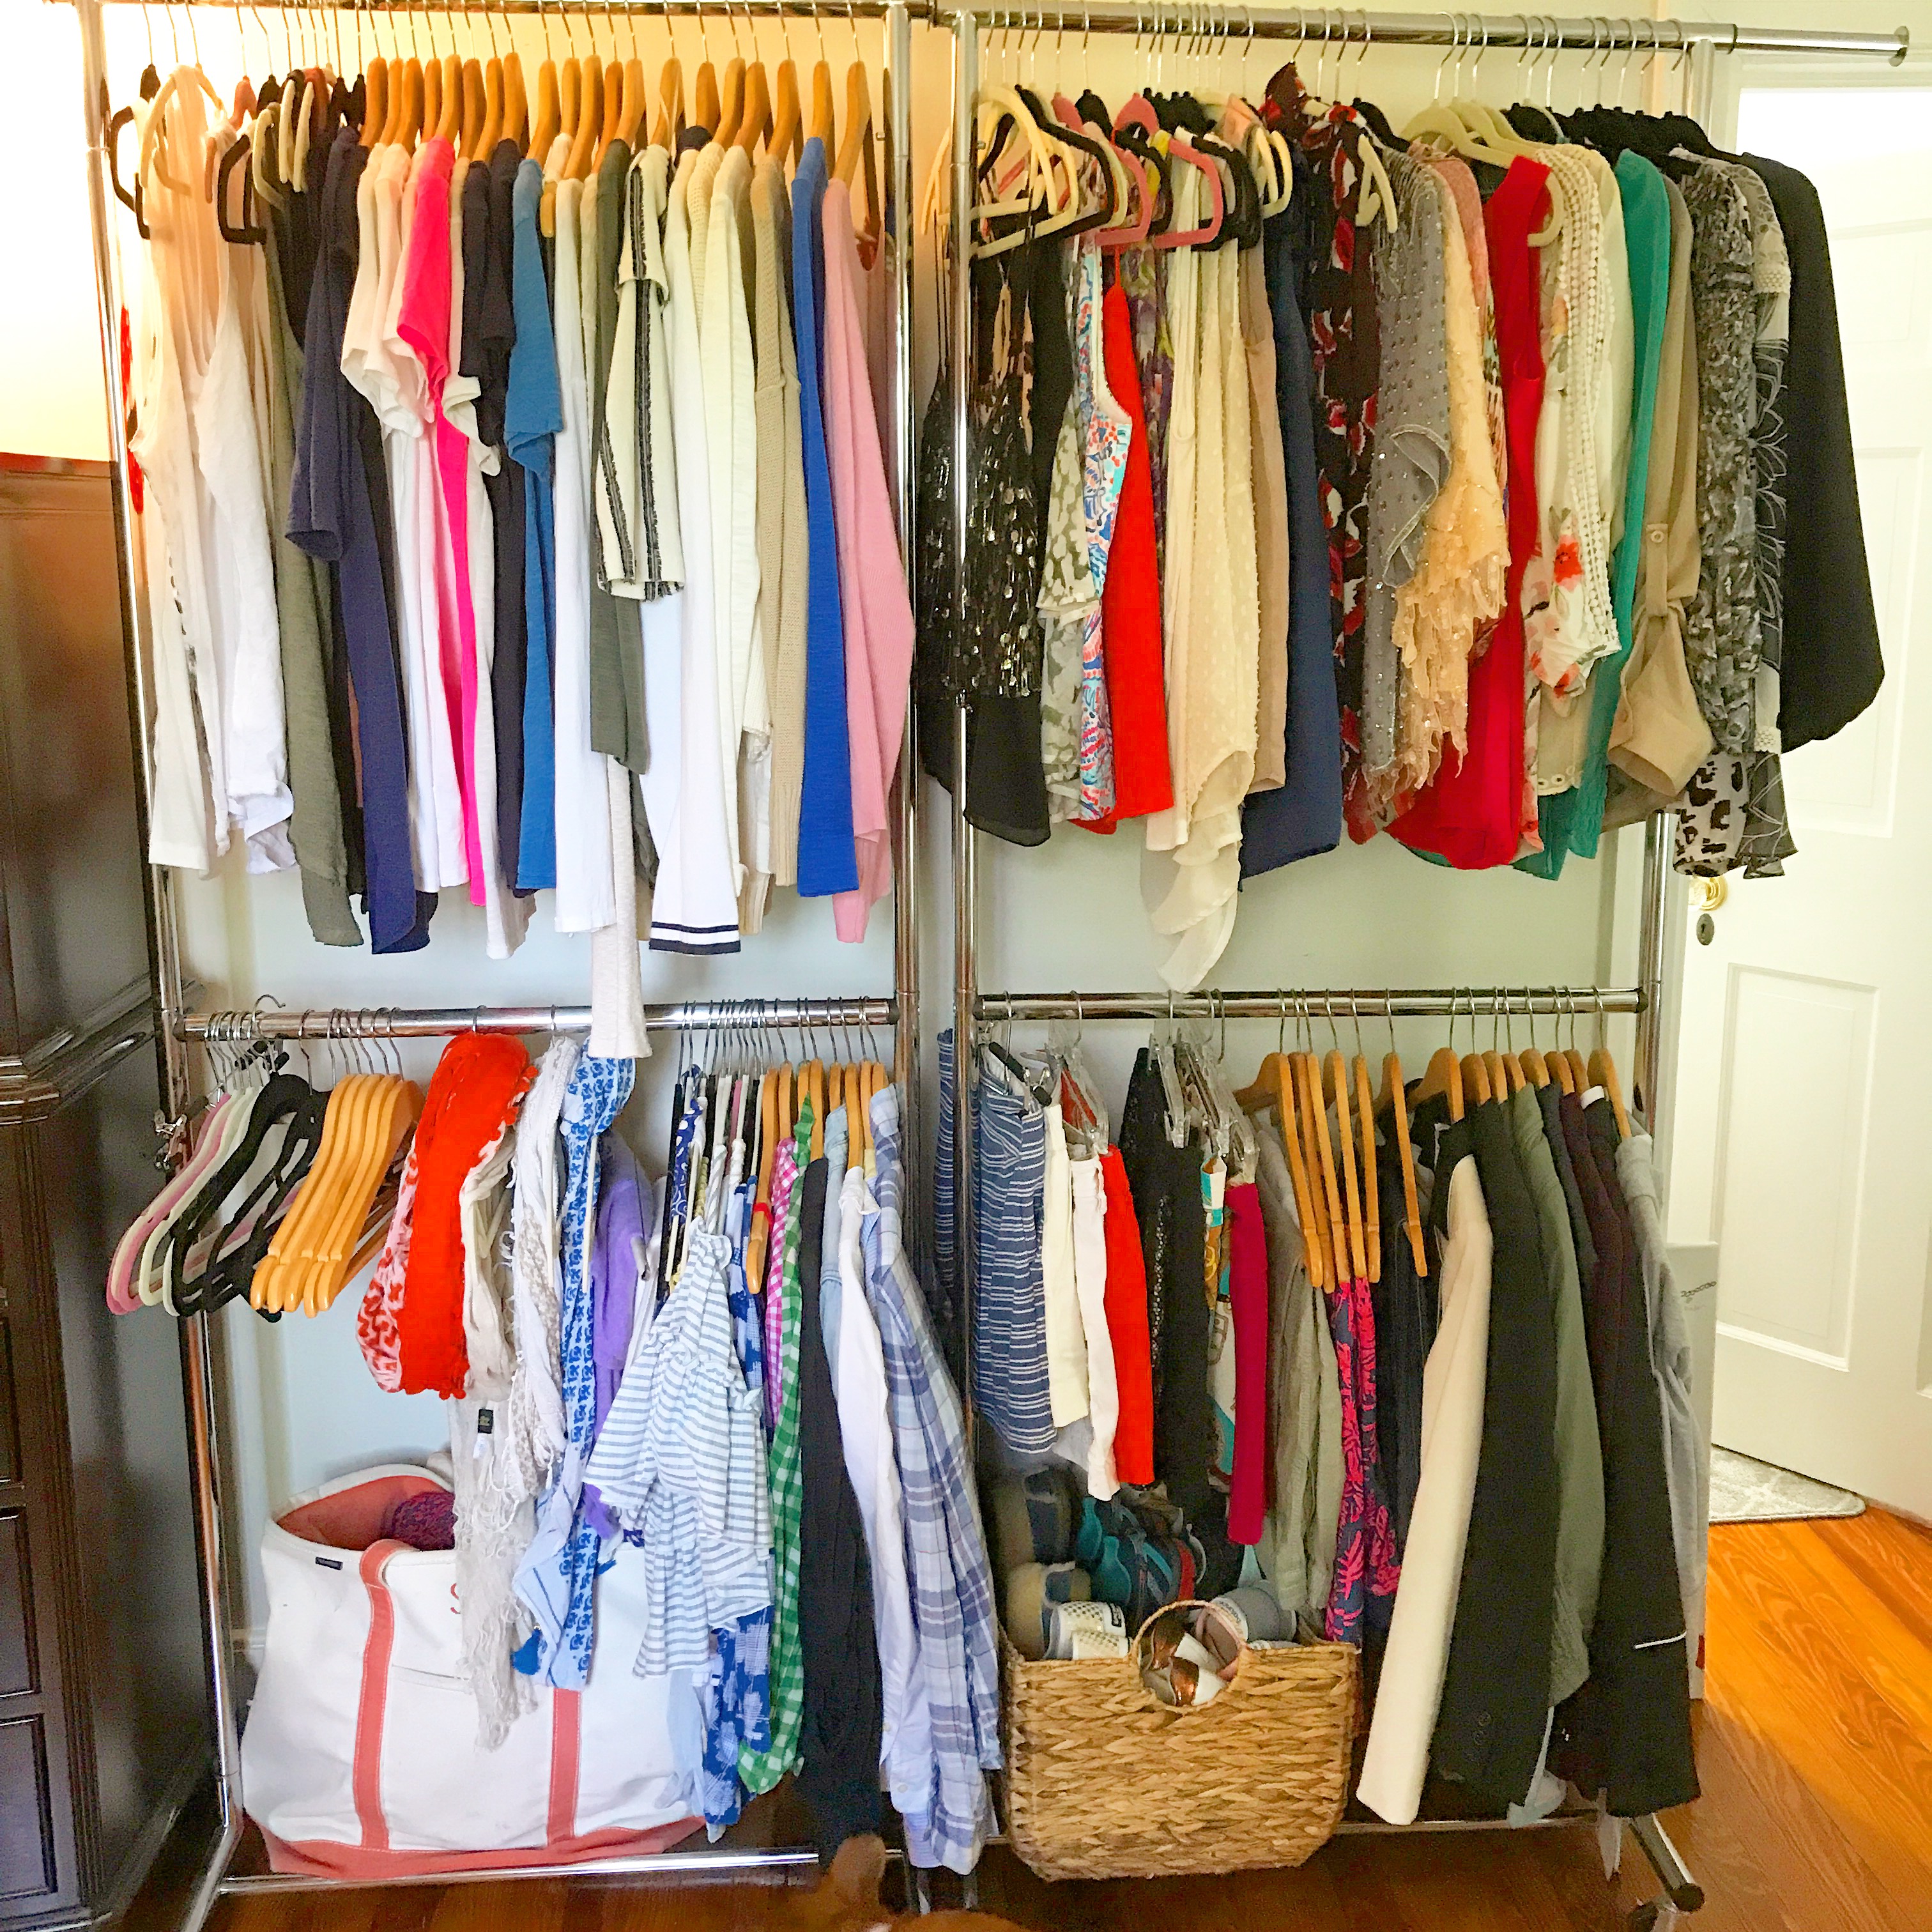 The 2 Most Important Items To Have In Your Closet Are…